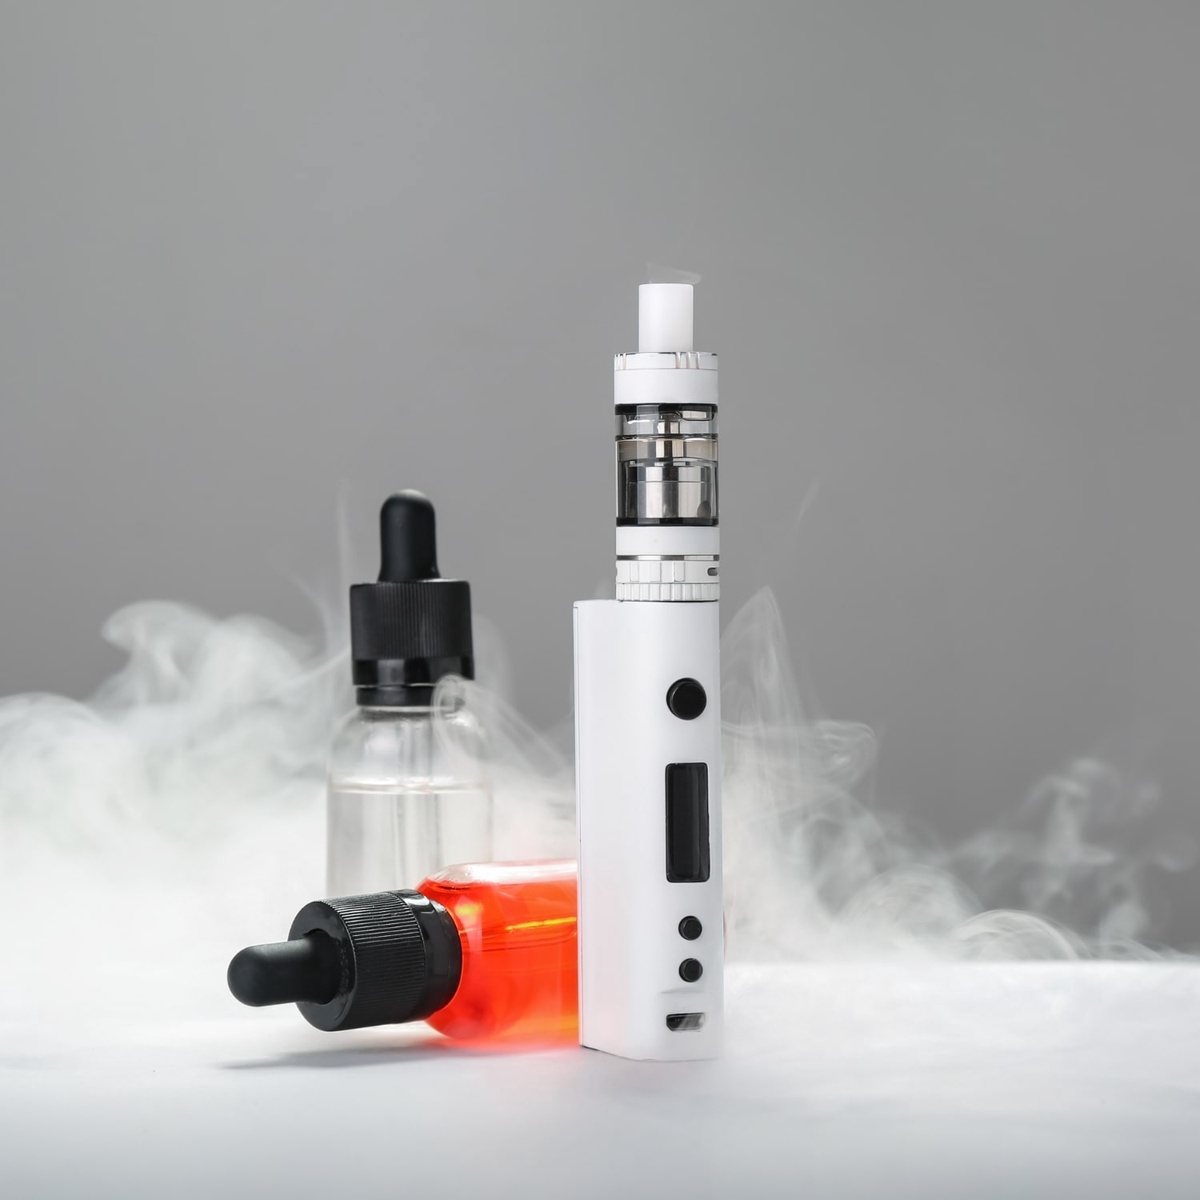 What are the distinguishing features of the "King" vape device and how does it compare to other vaping products on the market